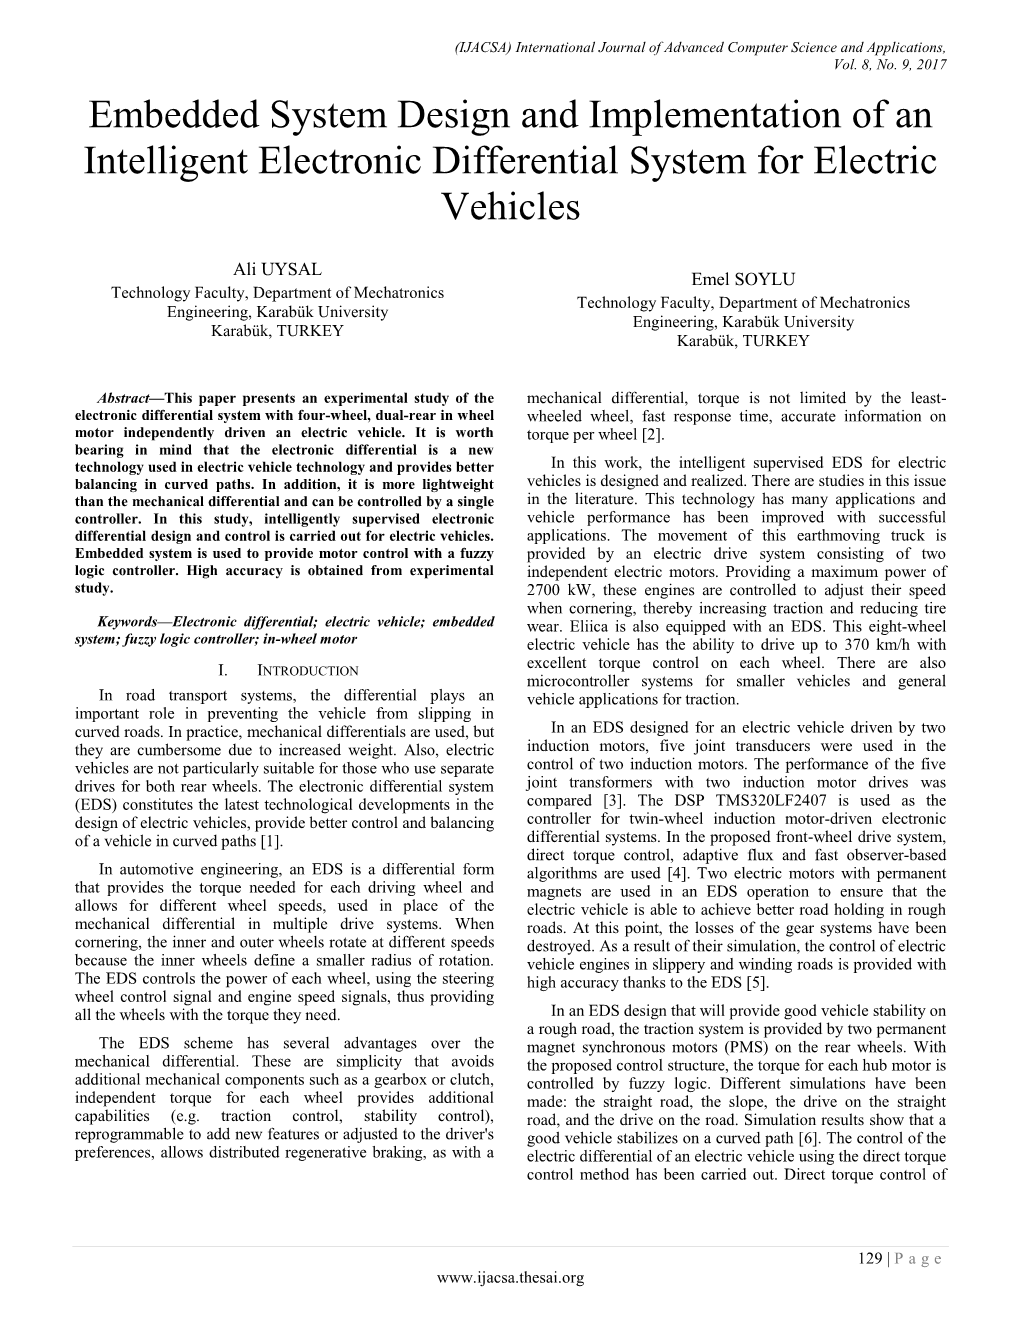 Embedded System Design and Implementation of an Intelligent Electronic Differential System for Electric Vehicles